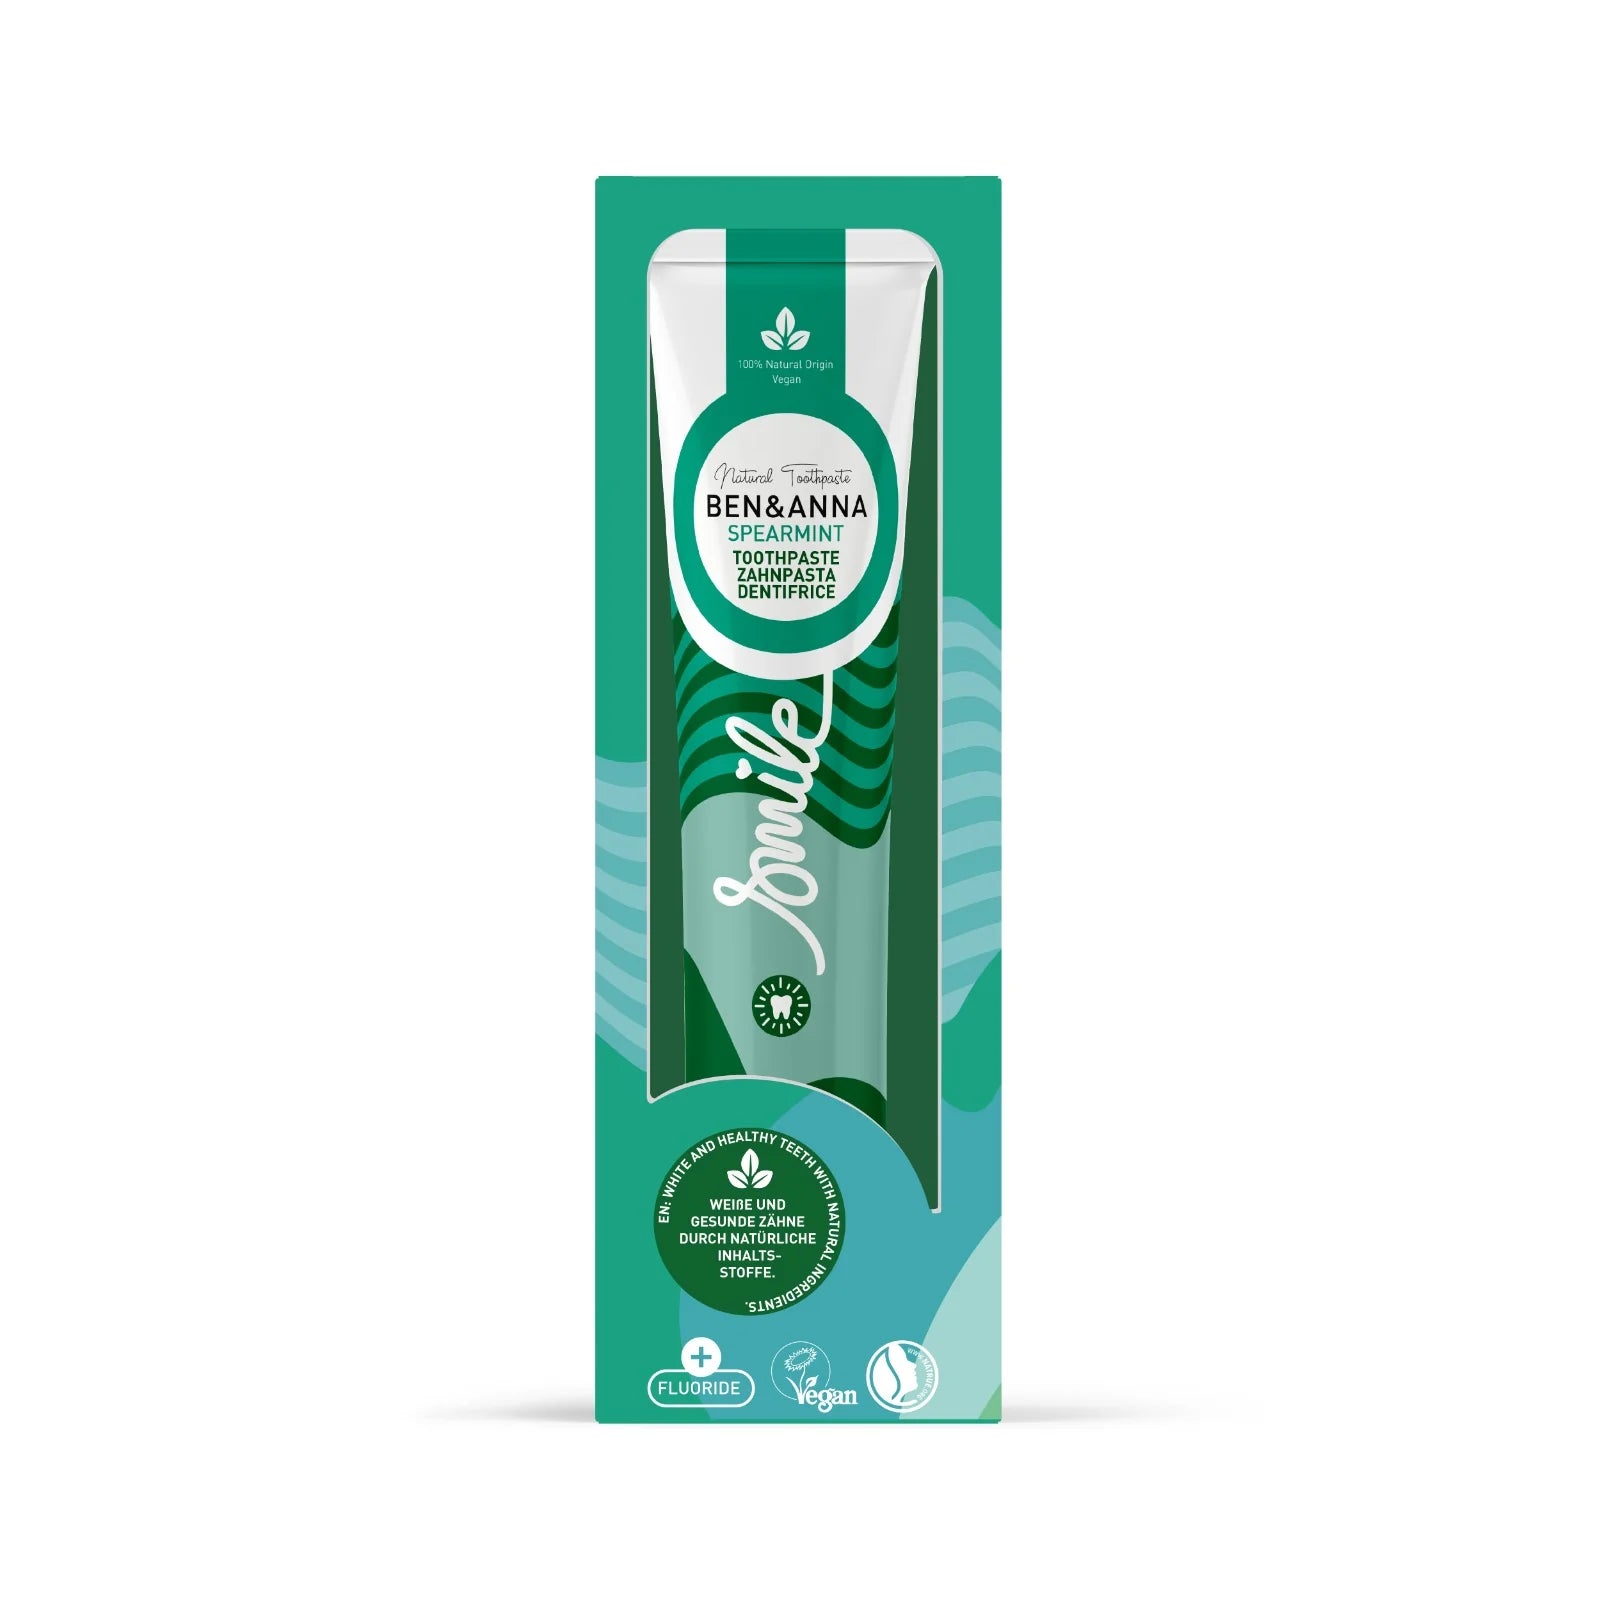 Mint with Fluoride Toothpaste Tube 75ml